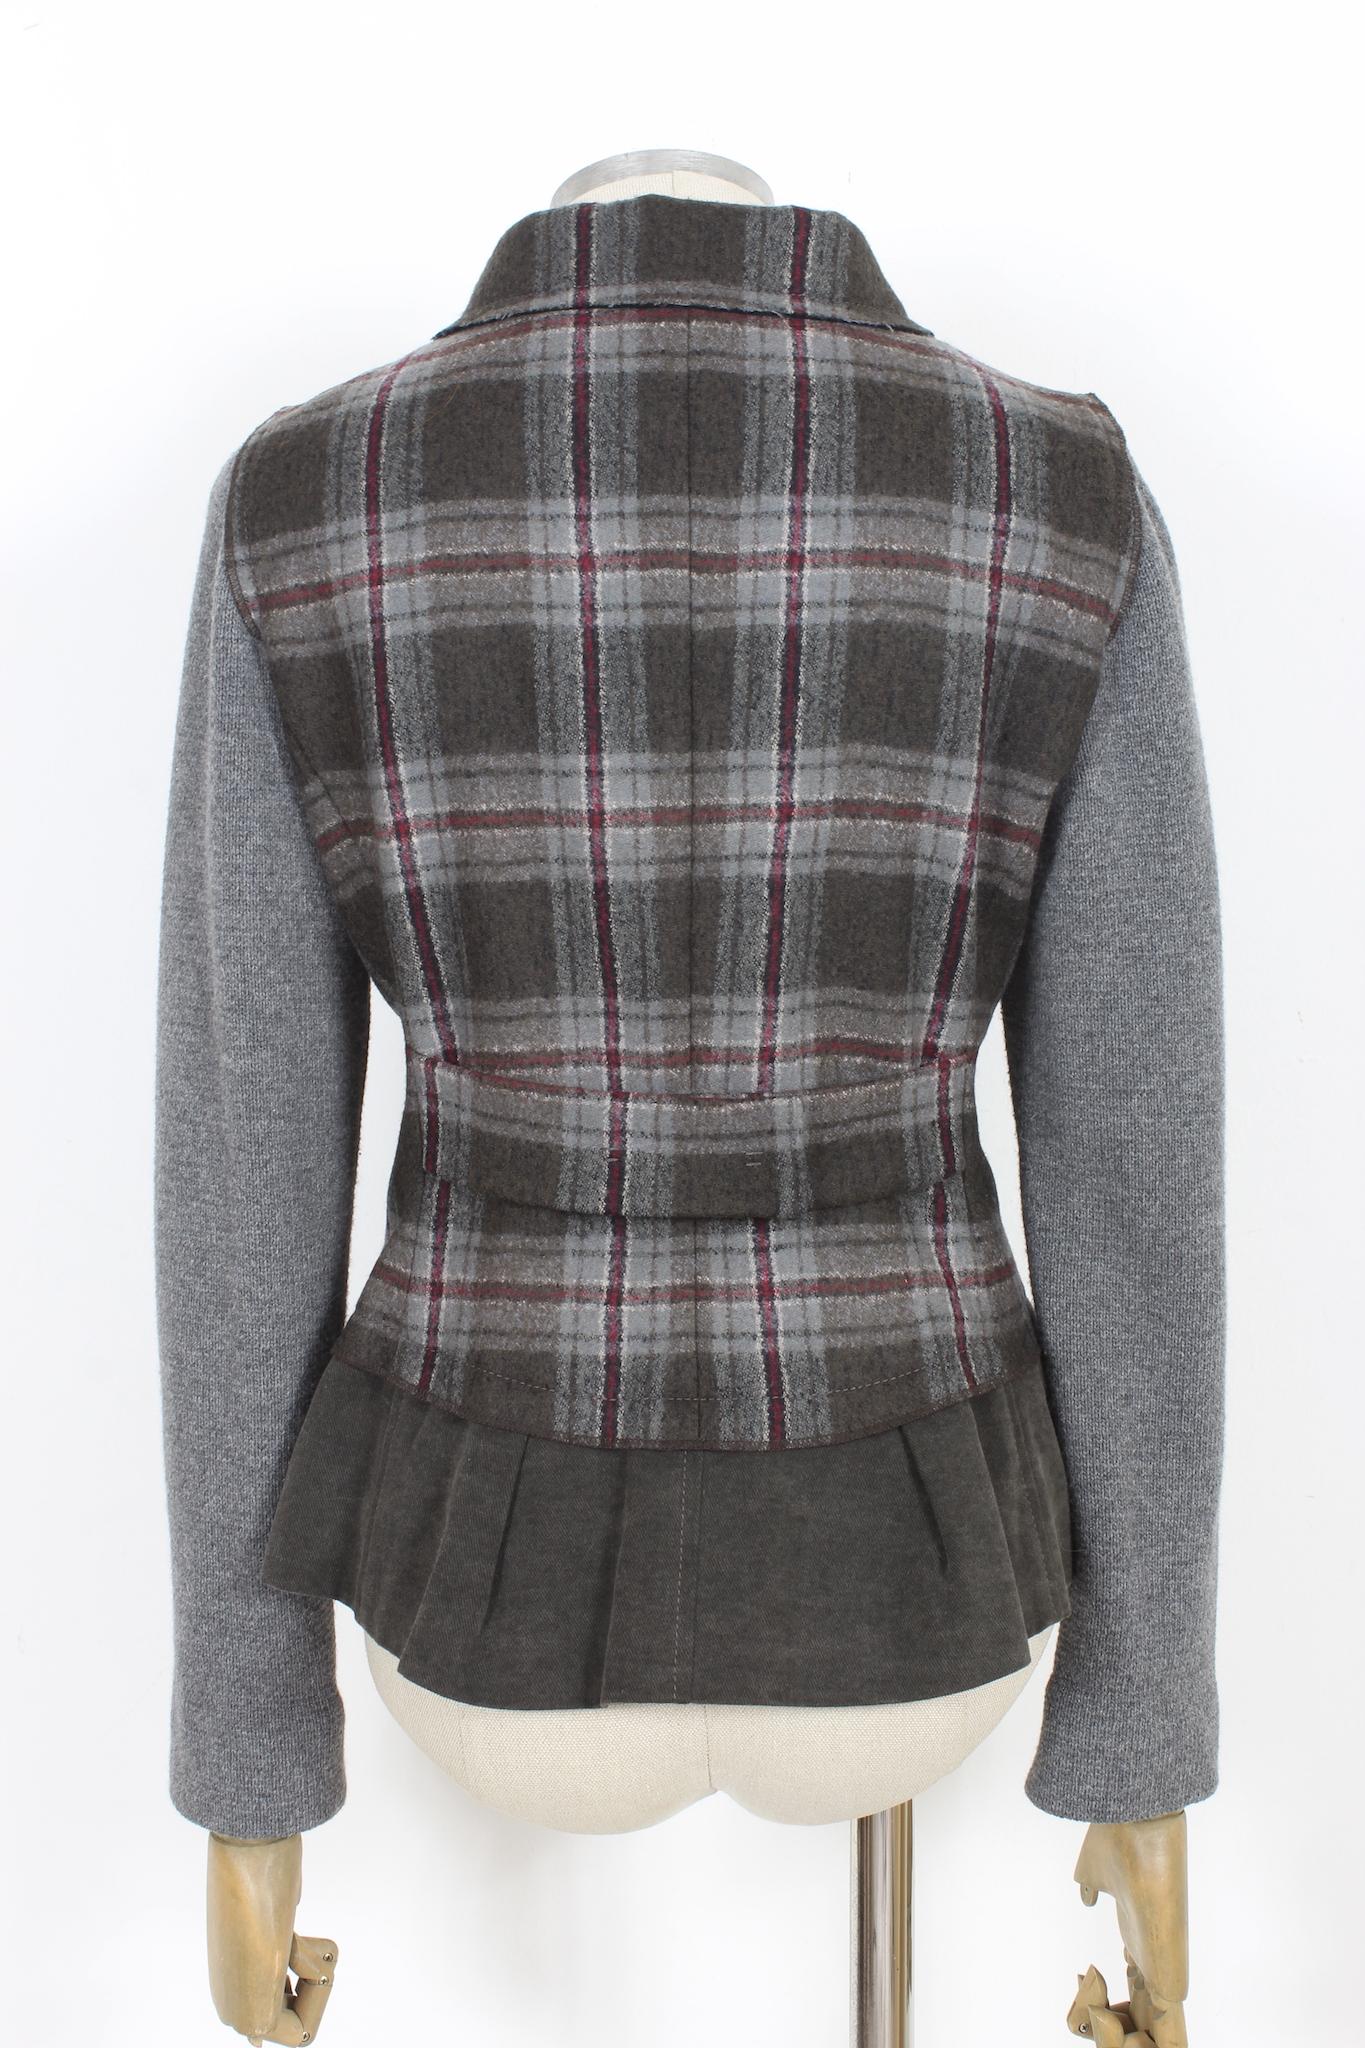 Alberta Ferretti 2000s short jacket. Coat model with checked pattern, gray and red. The sleeves are in jersey, the final part of the jacket in velvet. Clip button closure. 100% wool fabric. Made in italy.

Size: 42 It 8 Us 10 Uk

Shoulder: